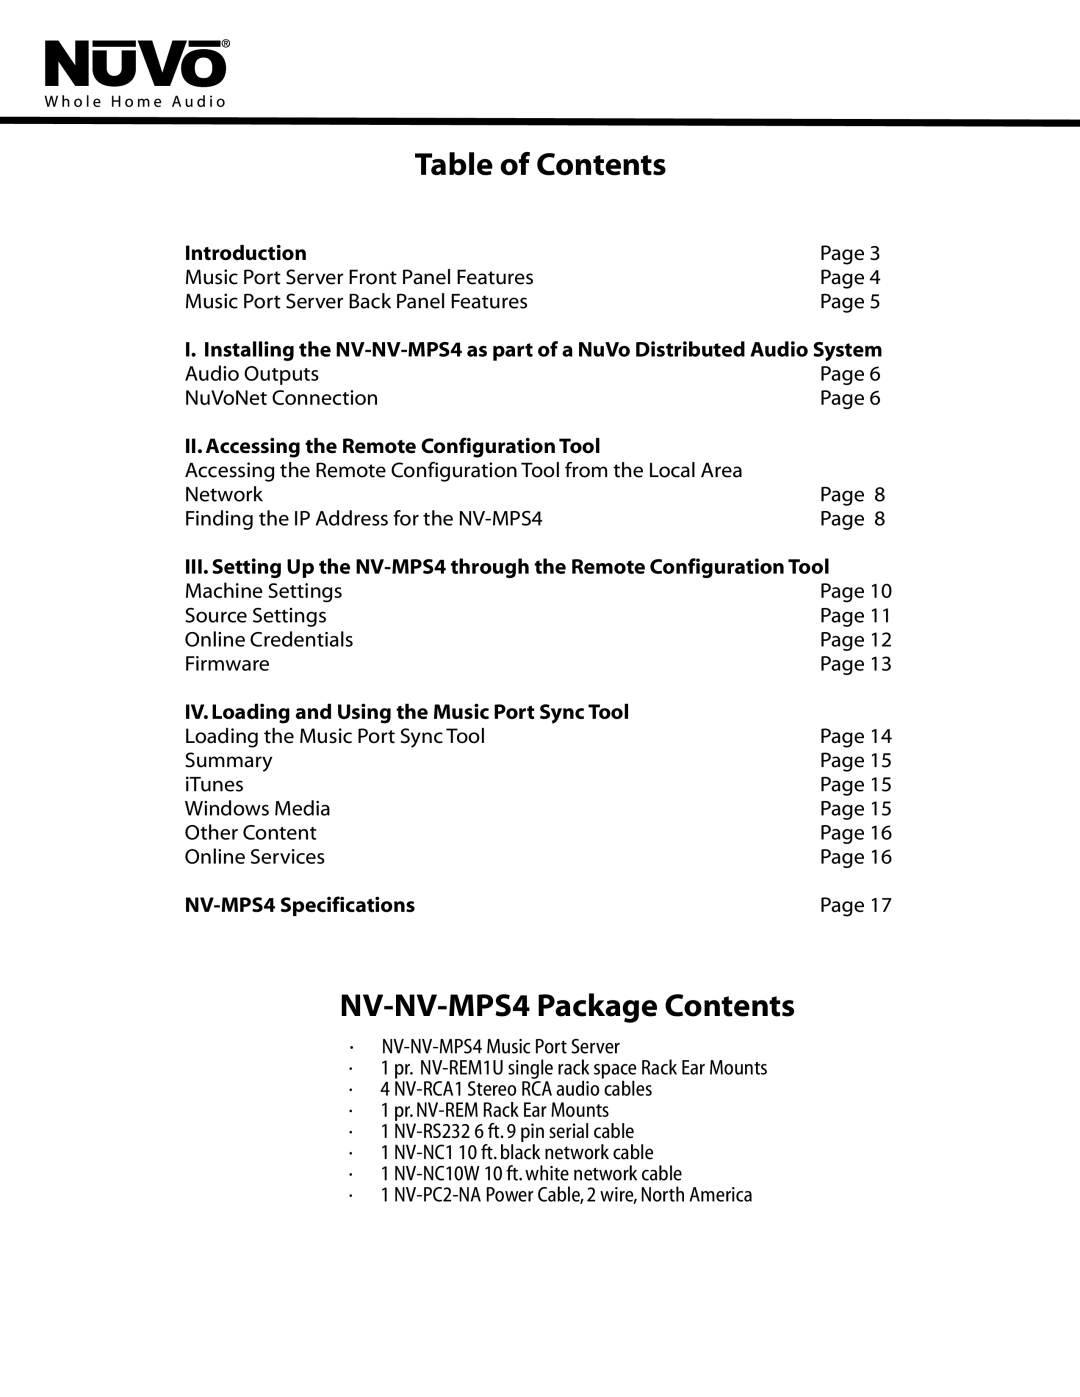 Nuvo manual Table of Contents, NV-NV-MPS4 Package Contents, Introduction, II. Accessing the Remote Configuration Tool 